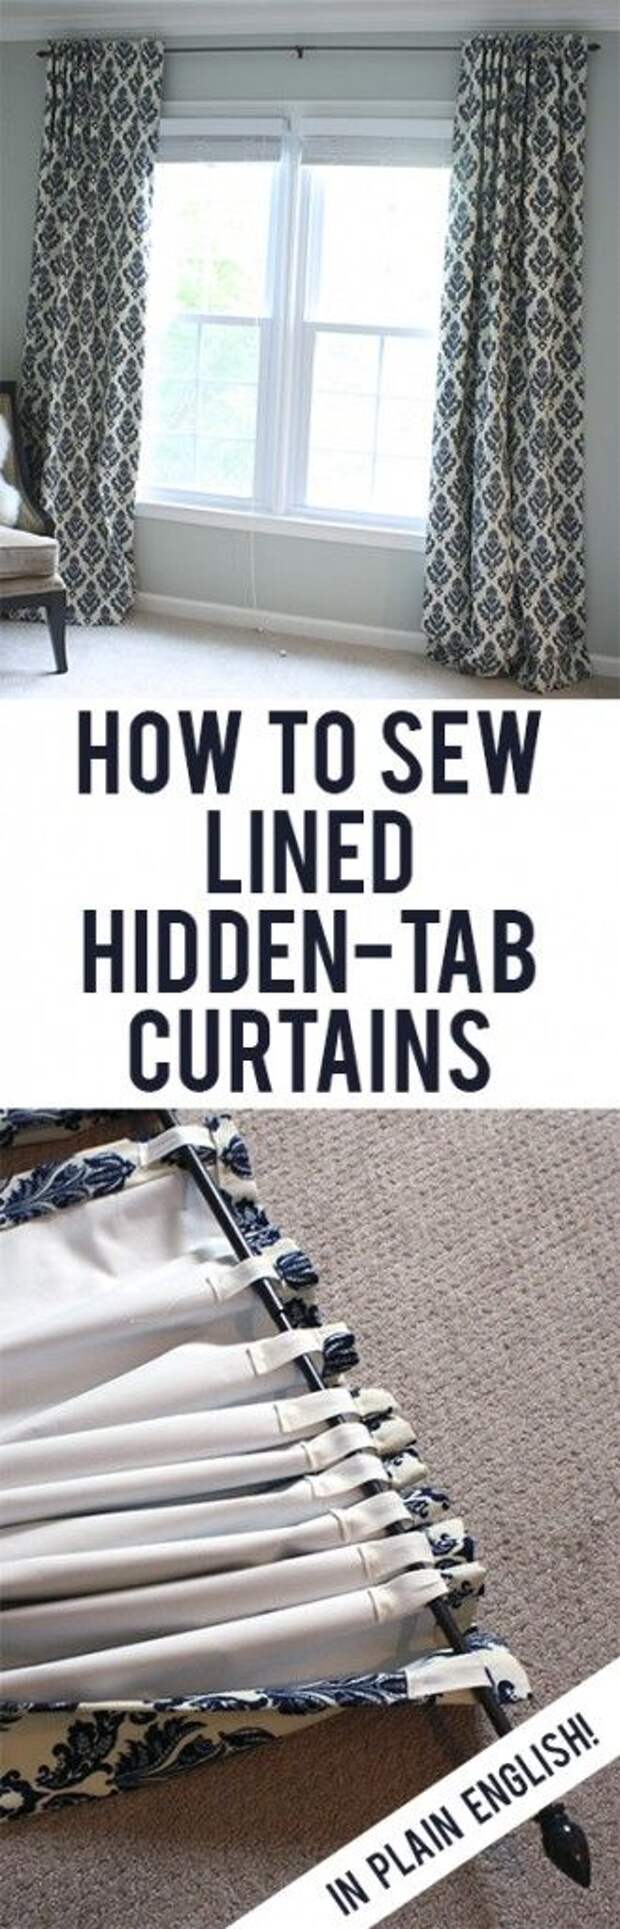 Easy, straightforward steps to making your own black-out lined back-tab curtains!: 